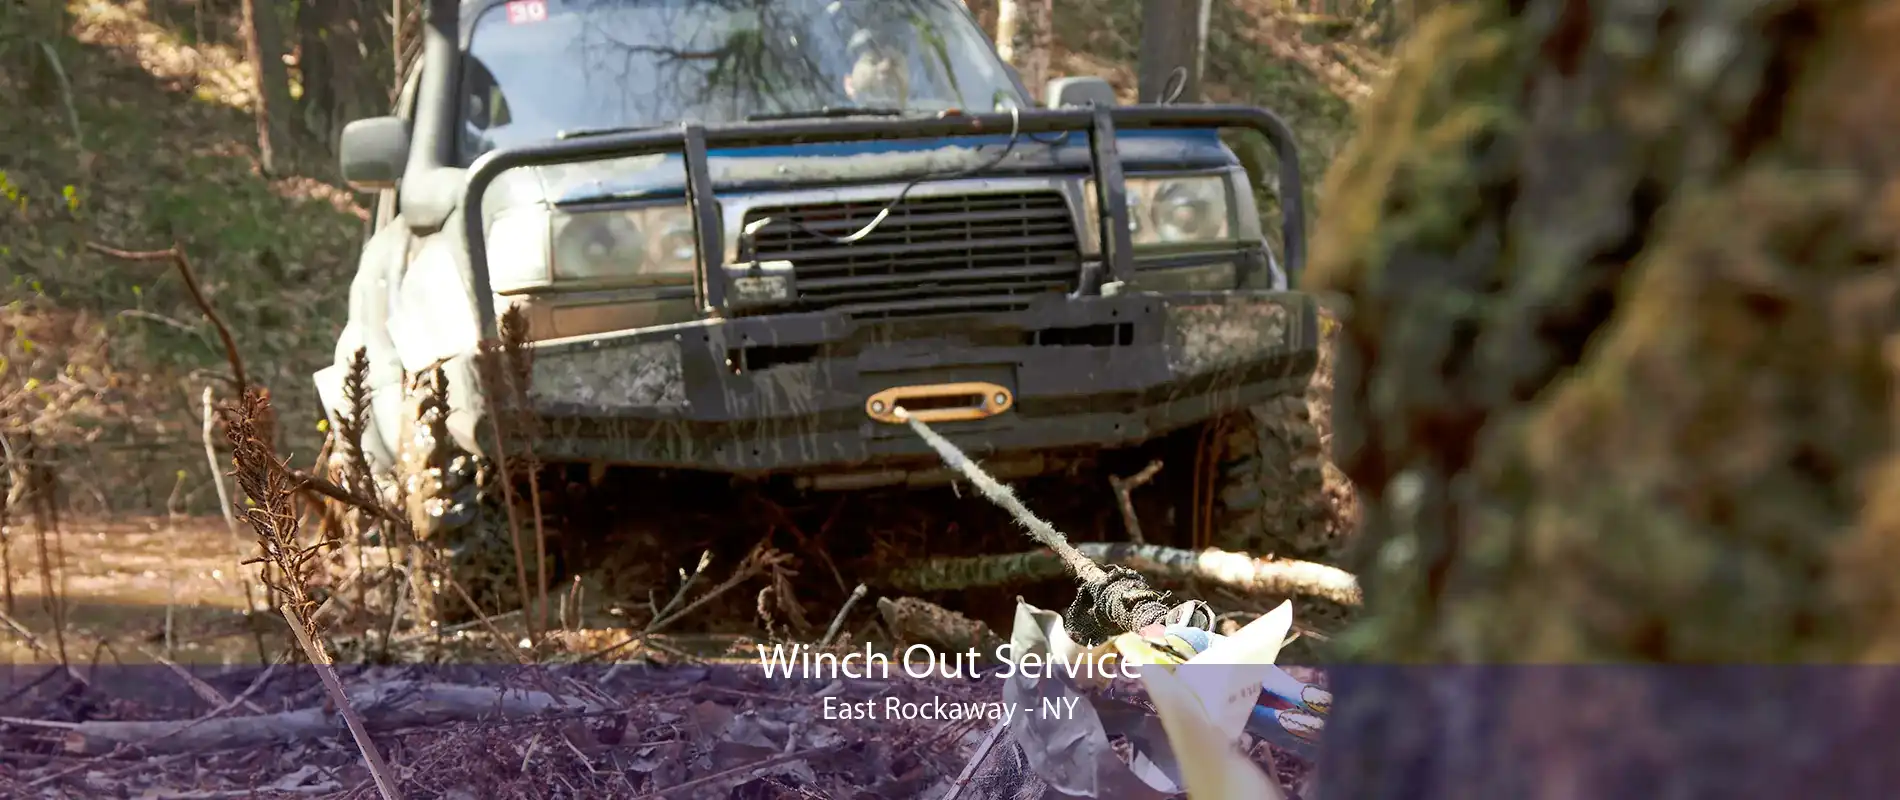 Winch Out Service East Rockaway - NY